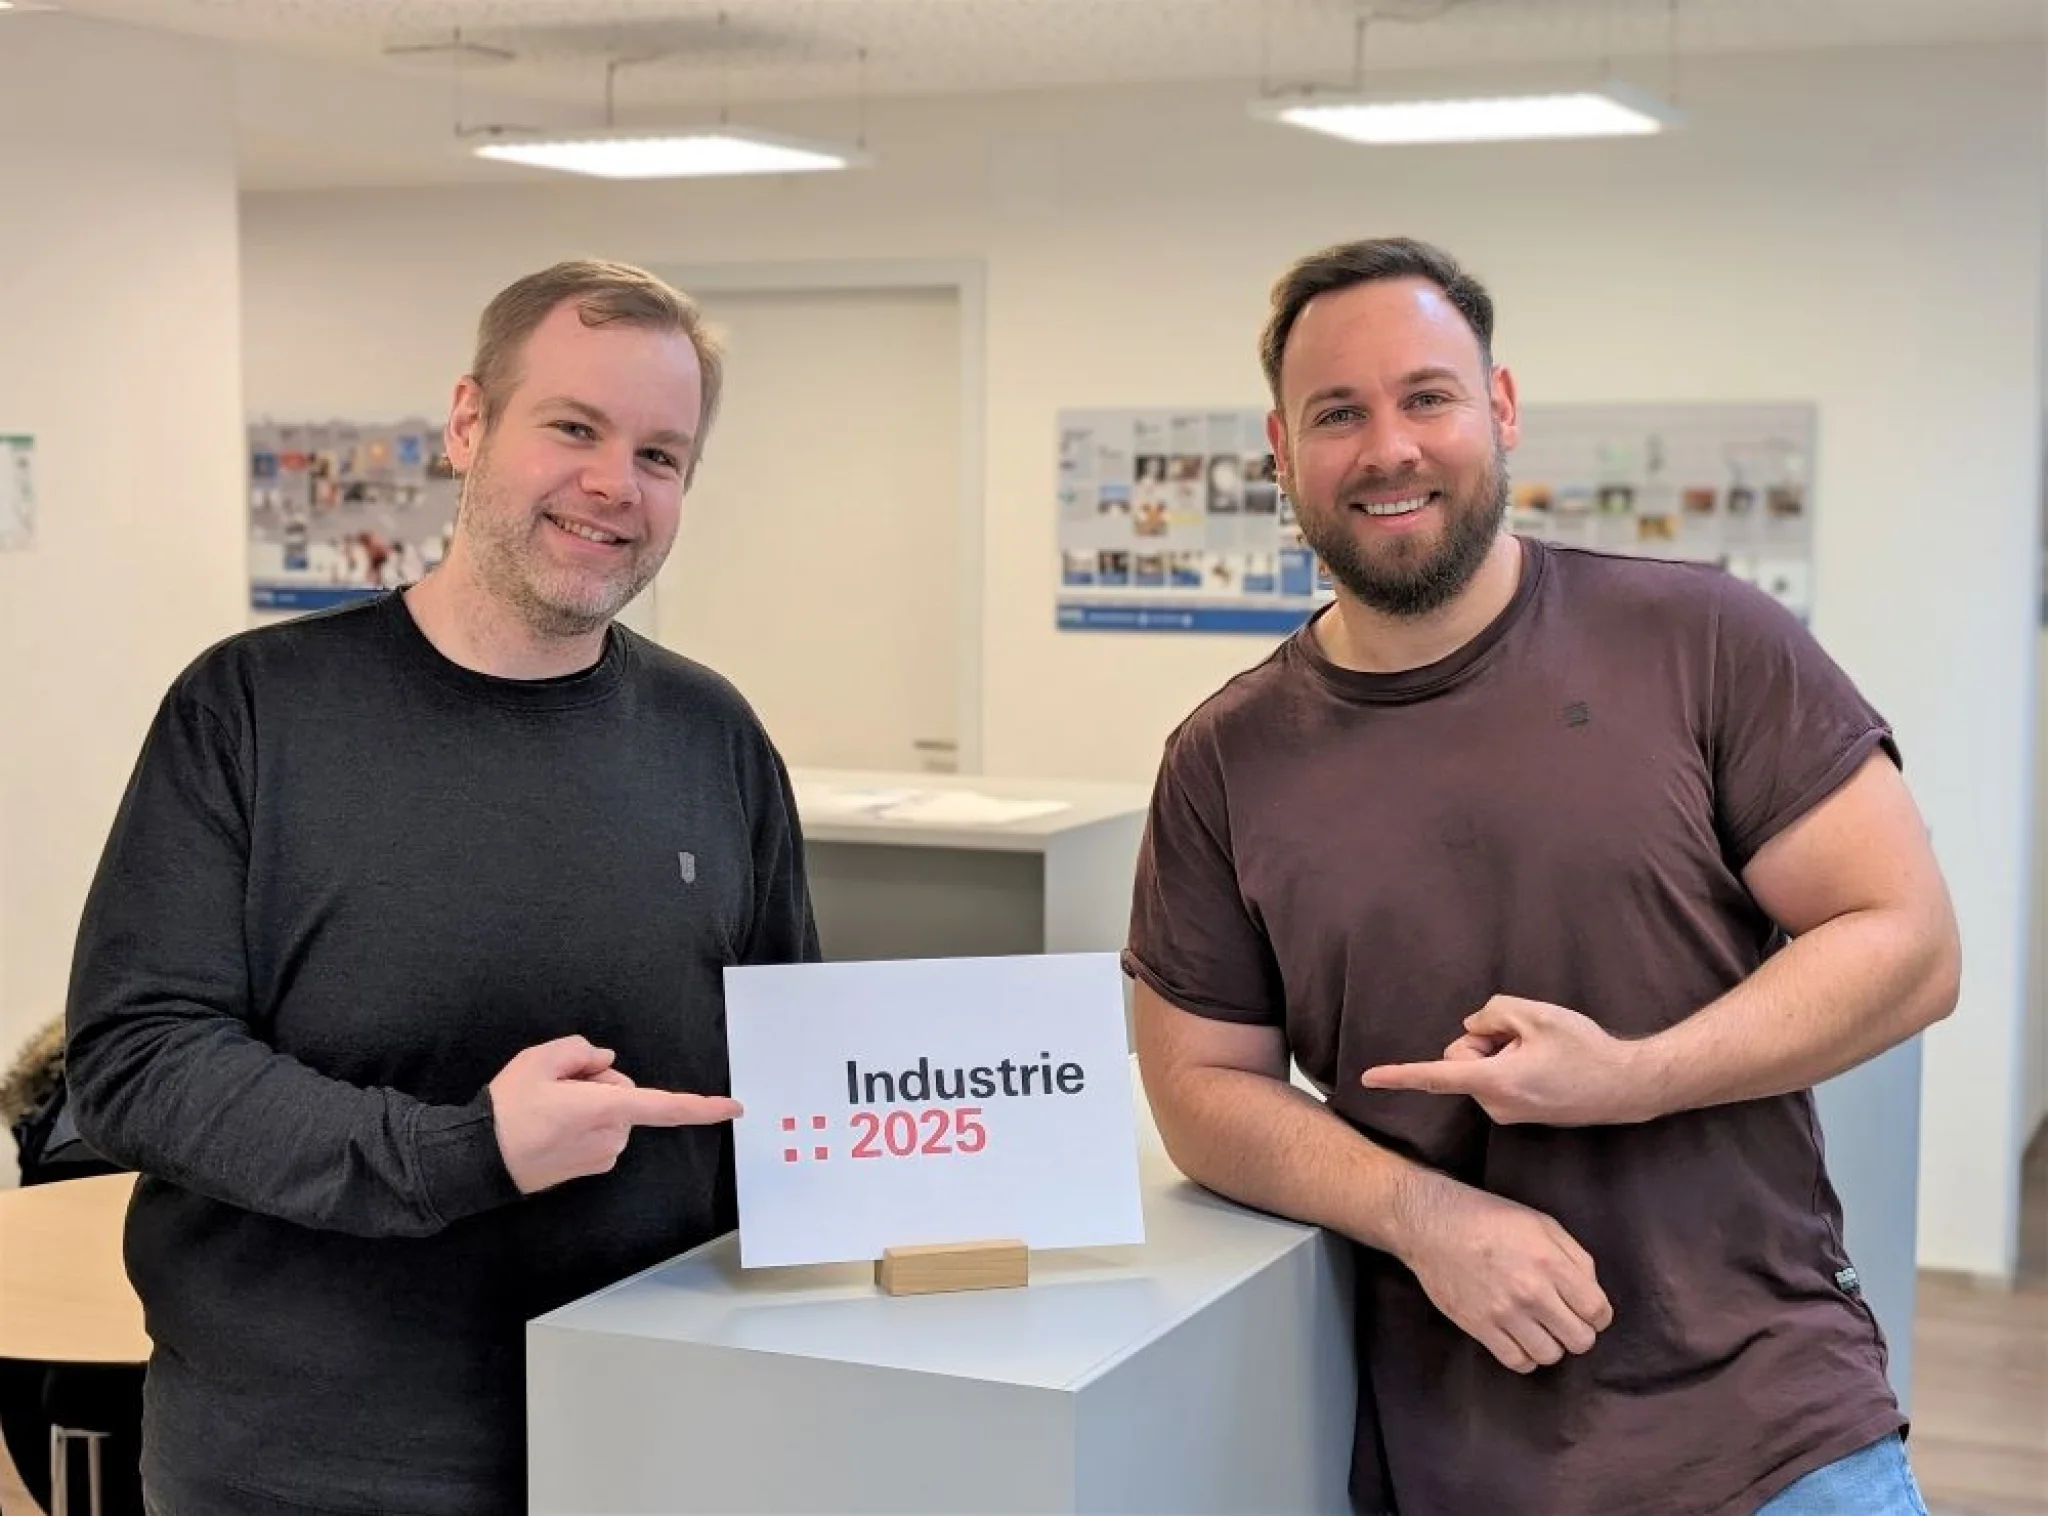 ControlTech Engineering is a new member of the Industrie 2025 initiative with Data Engineer Patric Sumlak and IT System Engineer Michael Gempp.